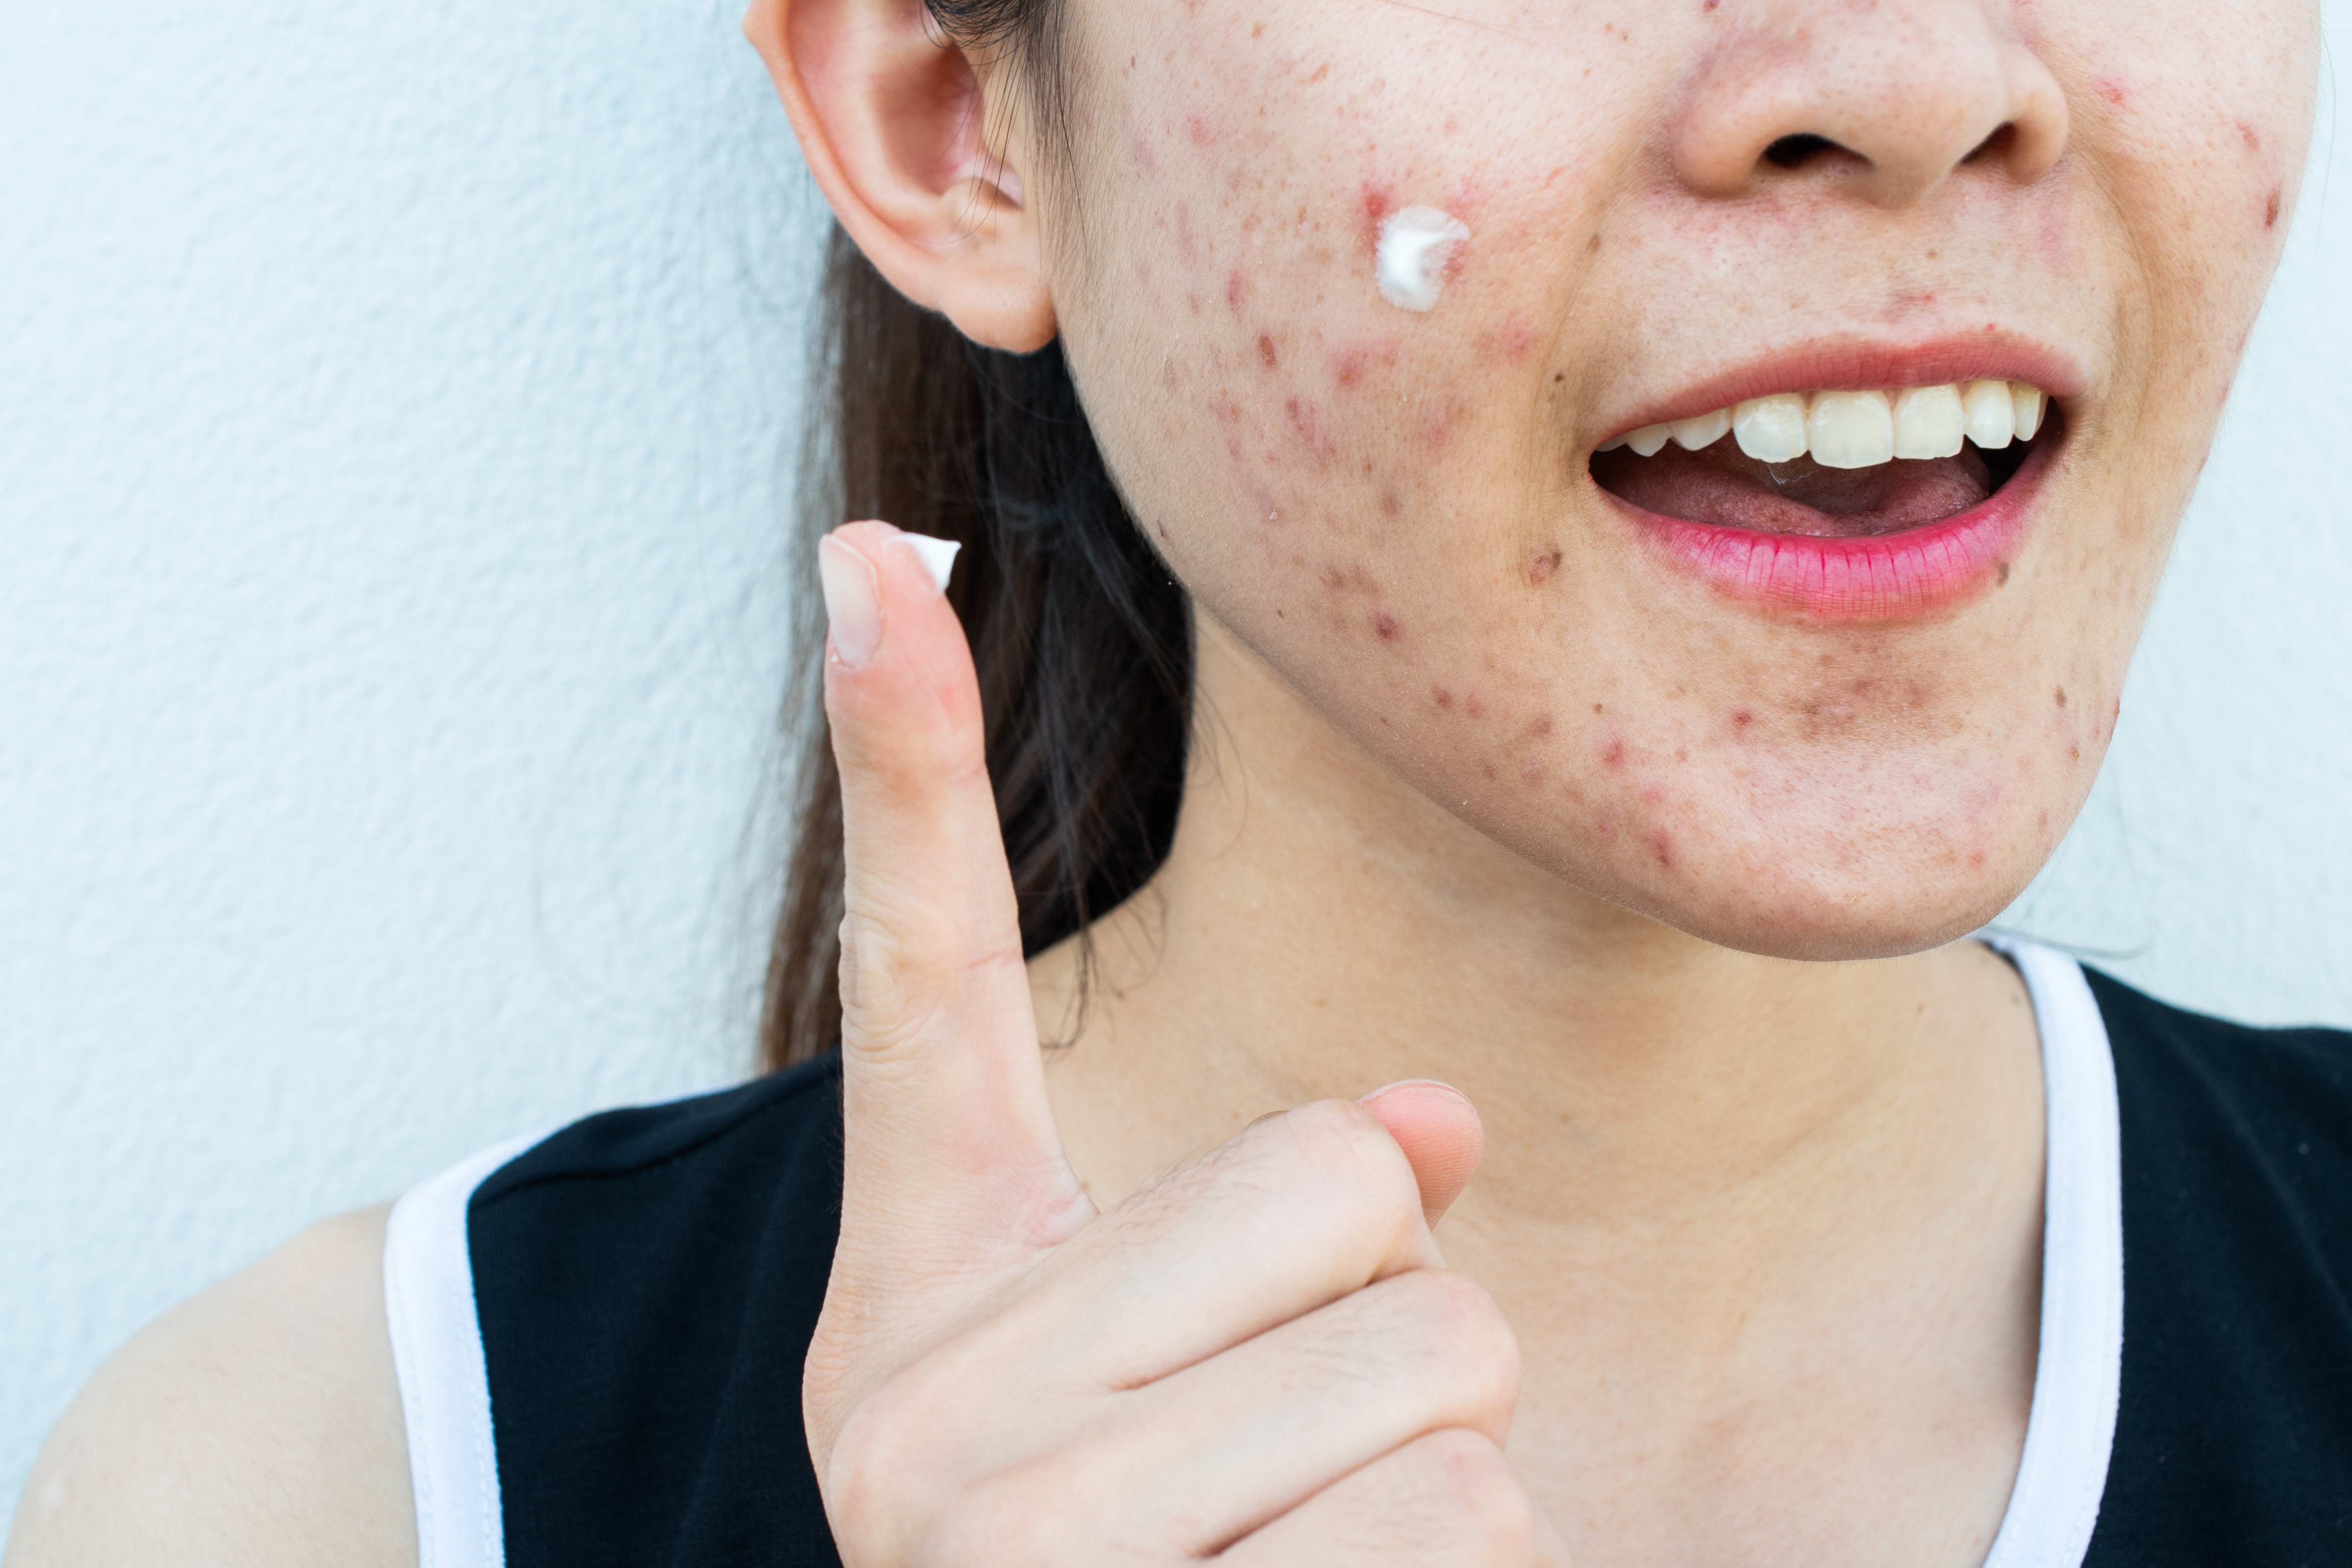 Cancer-causing chemical benzene found in popular acne products: U.S. lab